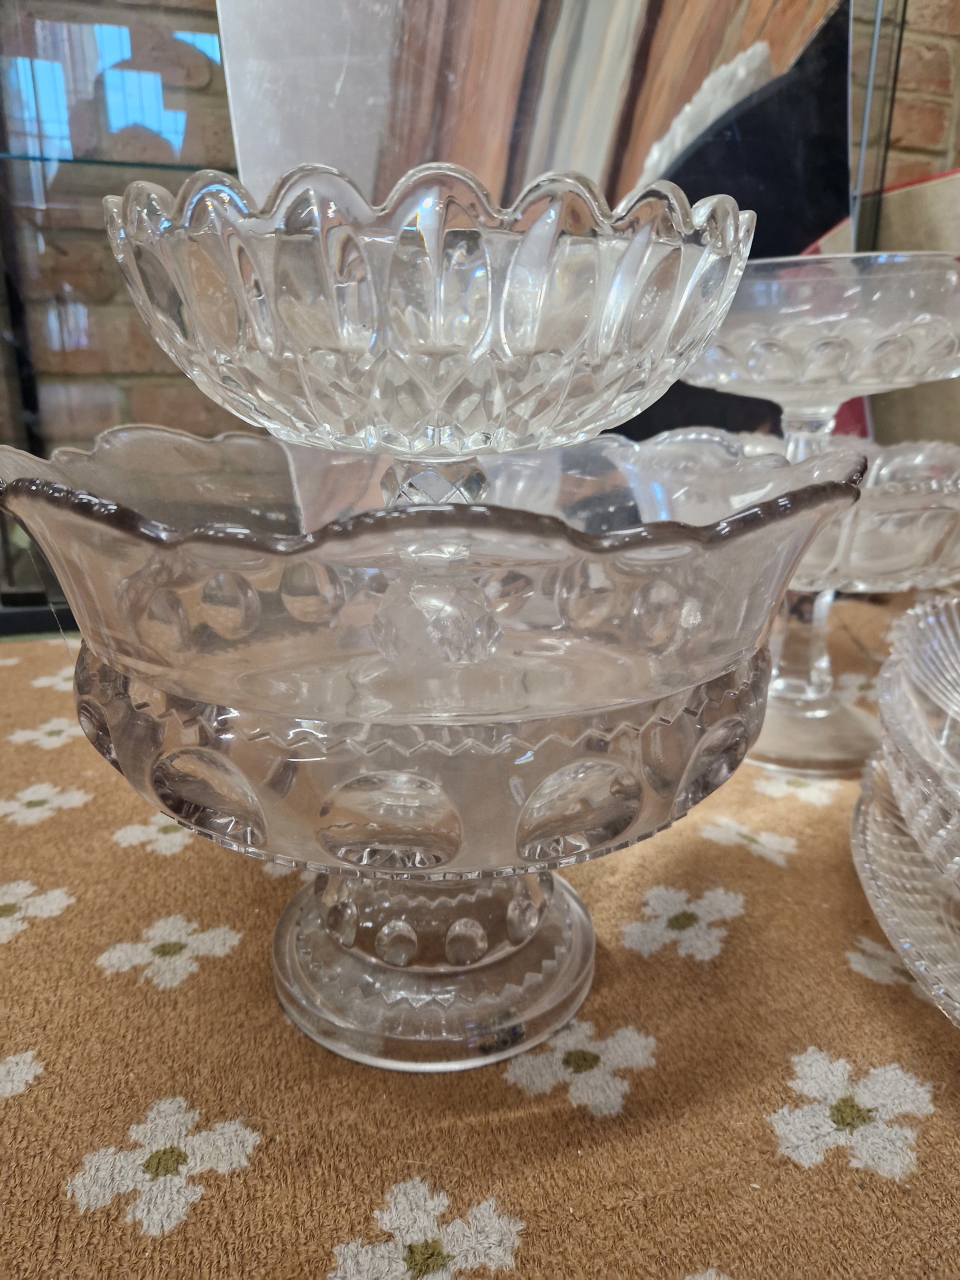 SIX CLEAR GLASS FOOTED BOWLS TOGETHER WITH A CUT GLASS OVAL BOWL AND STAND WITH FAN SHAPED HANDLES - Image 4 of 5